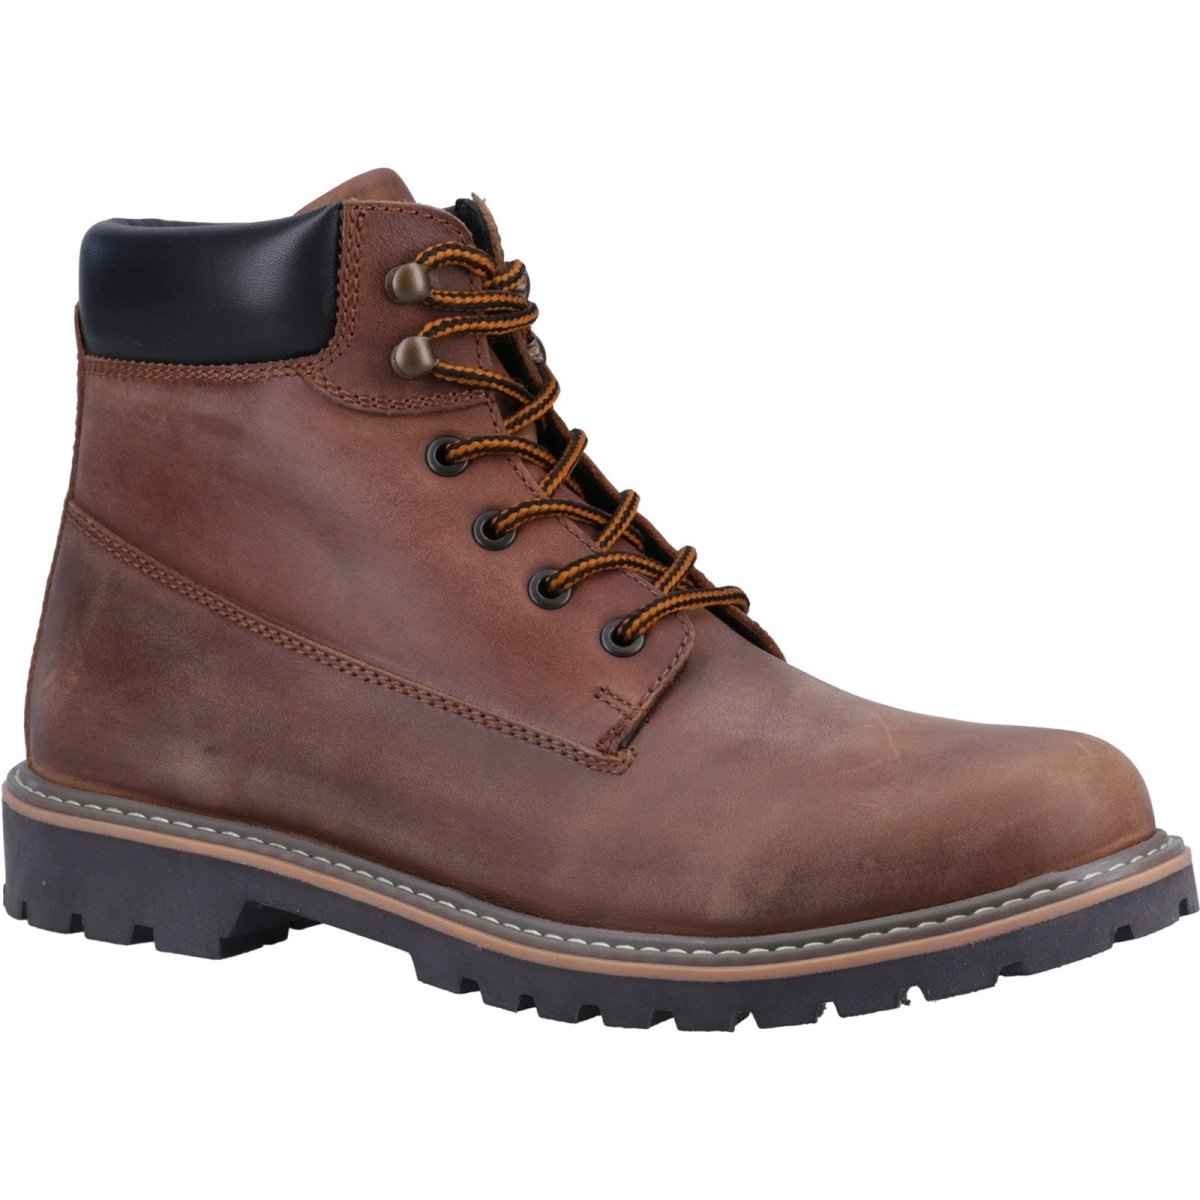 Cotswold Pitchcombe Boots - Shoe Store Direct